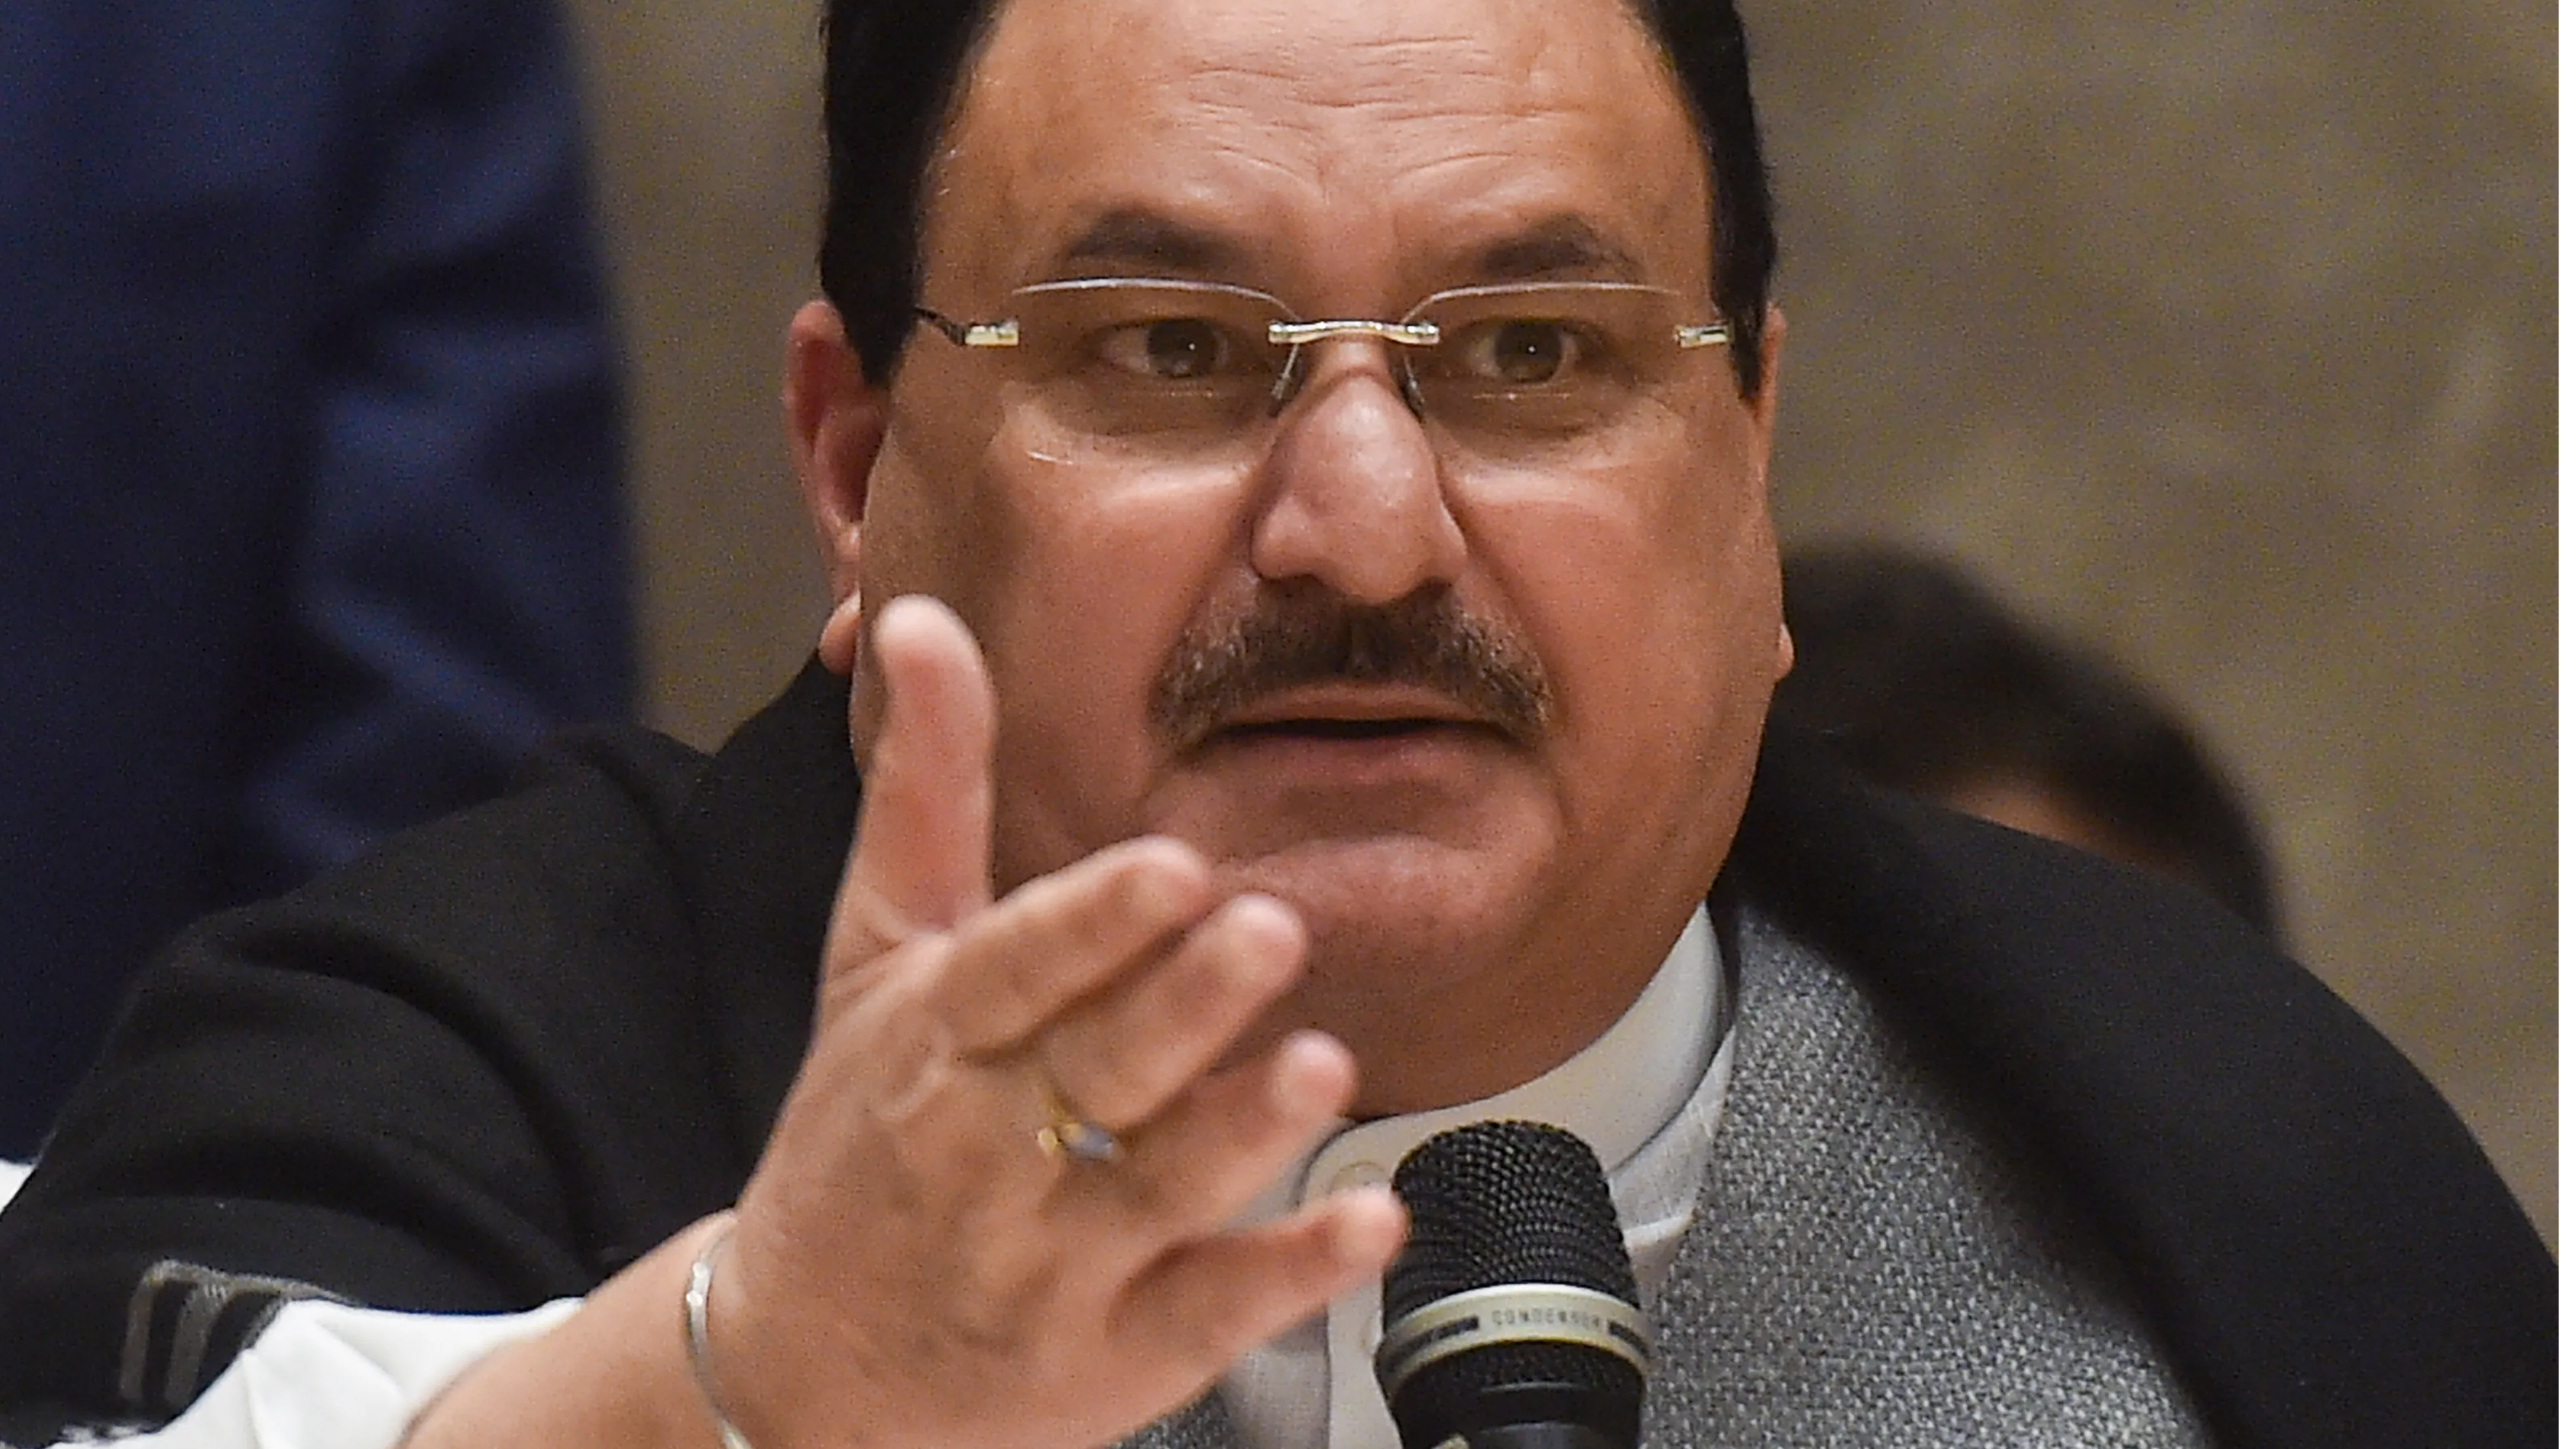 Your hypocrisy will not work: JP Nadda takes a dig at Rahul Gandhi by posting his old video